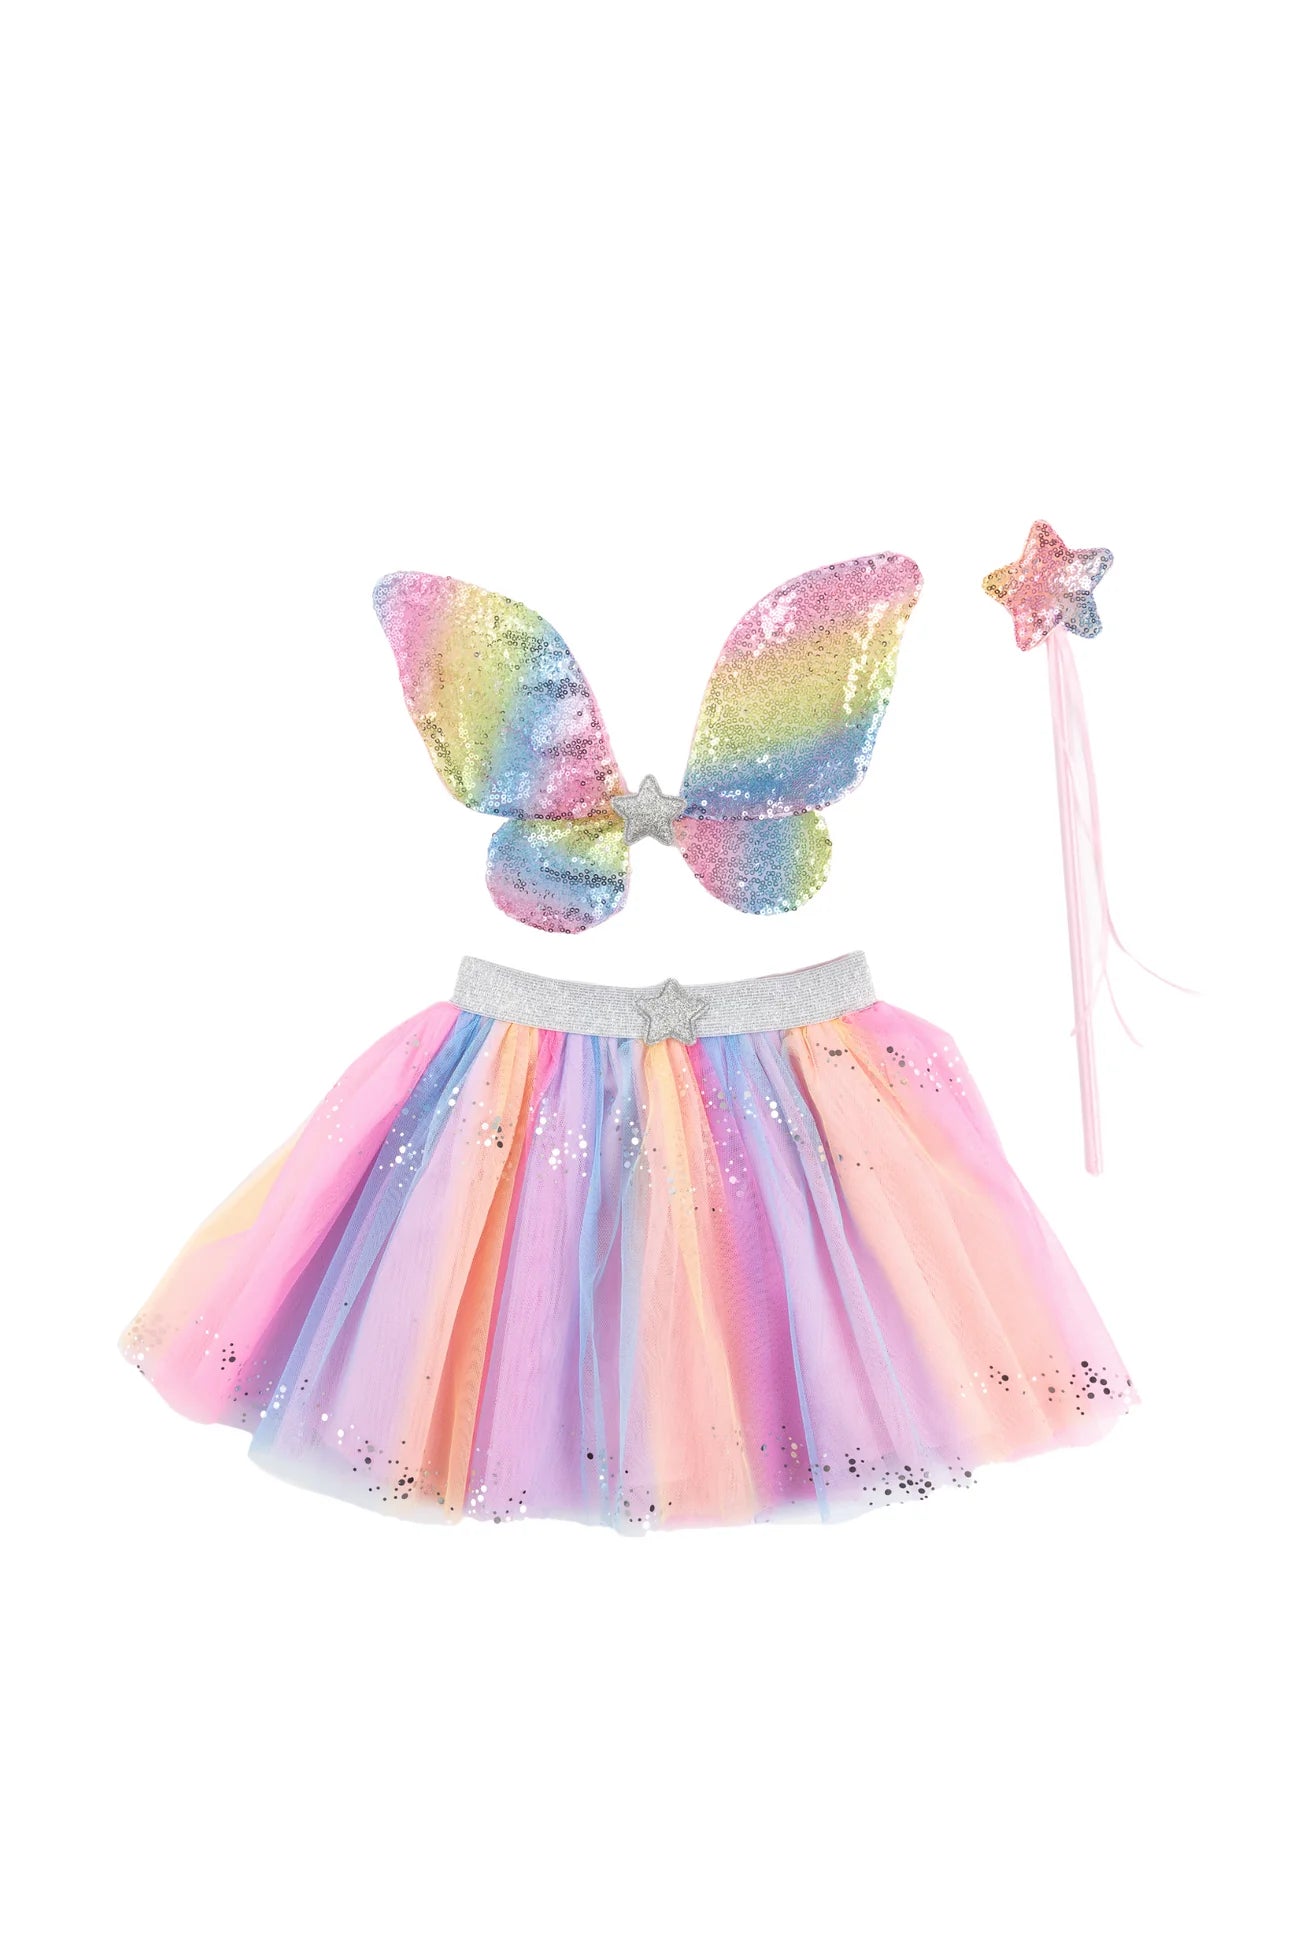 RAINBOW SEQUINS SKIRT, WINGS & WAND Size 4-6